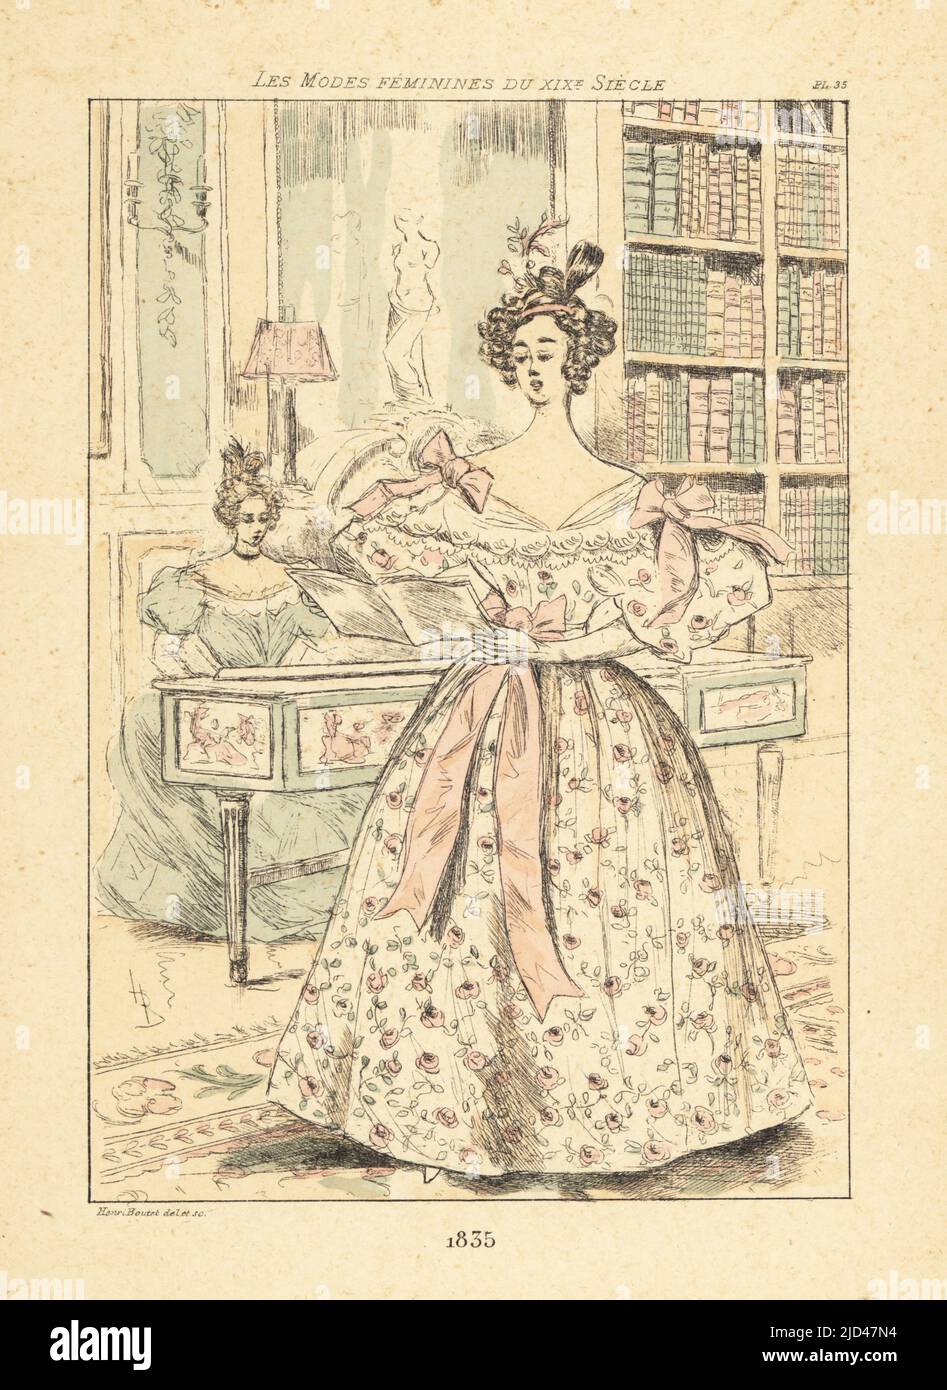 Fashionable woman singing from a musical score in a grand drawing room, accompanied by a lady on the harpsichord, Paris, 1835. She wears a low-cut gown decorated with ribbons, her hair in curls. Handcoloured drypoint or pointe-seche etching by Henri Boutet from Les Modes Feminines du XIXeme Siecle (Female Fashions of the 19th Century), Ernest Flammarion, Paris, 1902. Boutet (1851-1919) was a French artist, engraver, lithographer and designer. Stock Photo